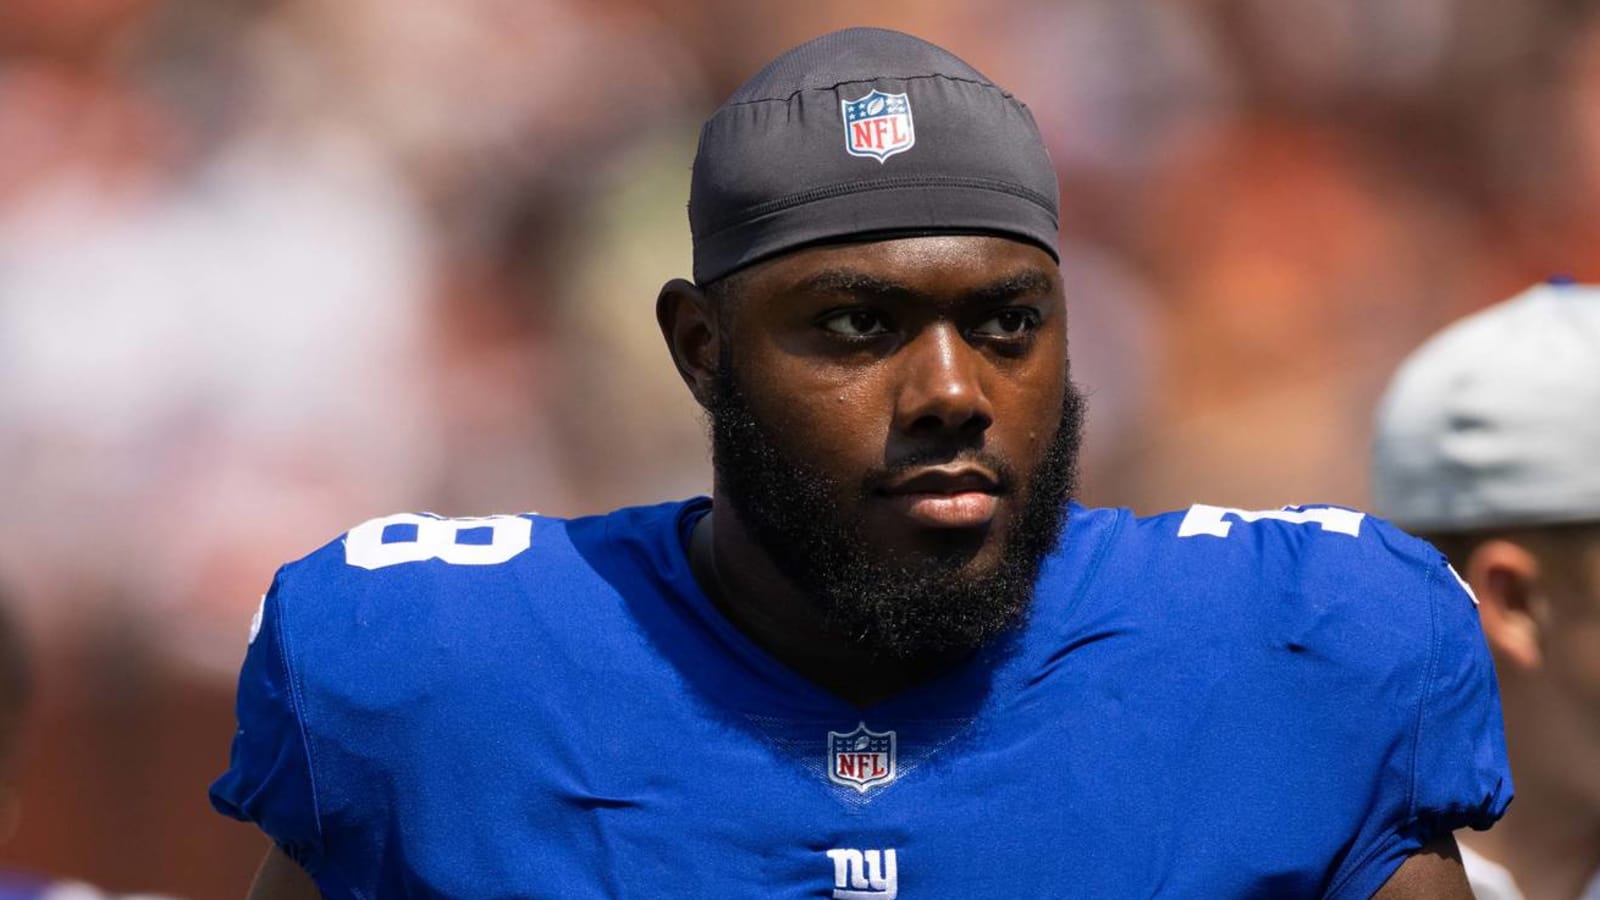 Giants place LT Andrew Thomas on IR with ankle injury